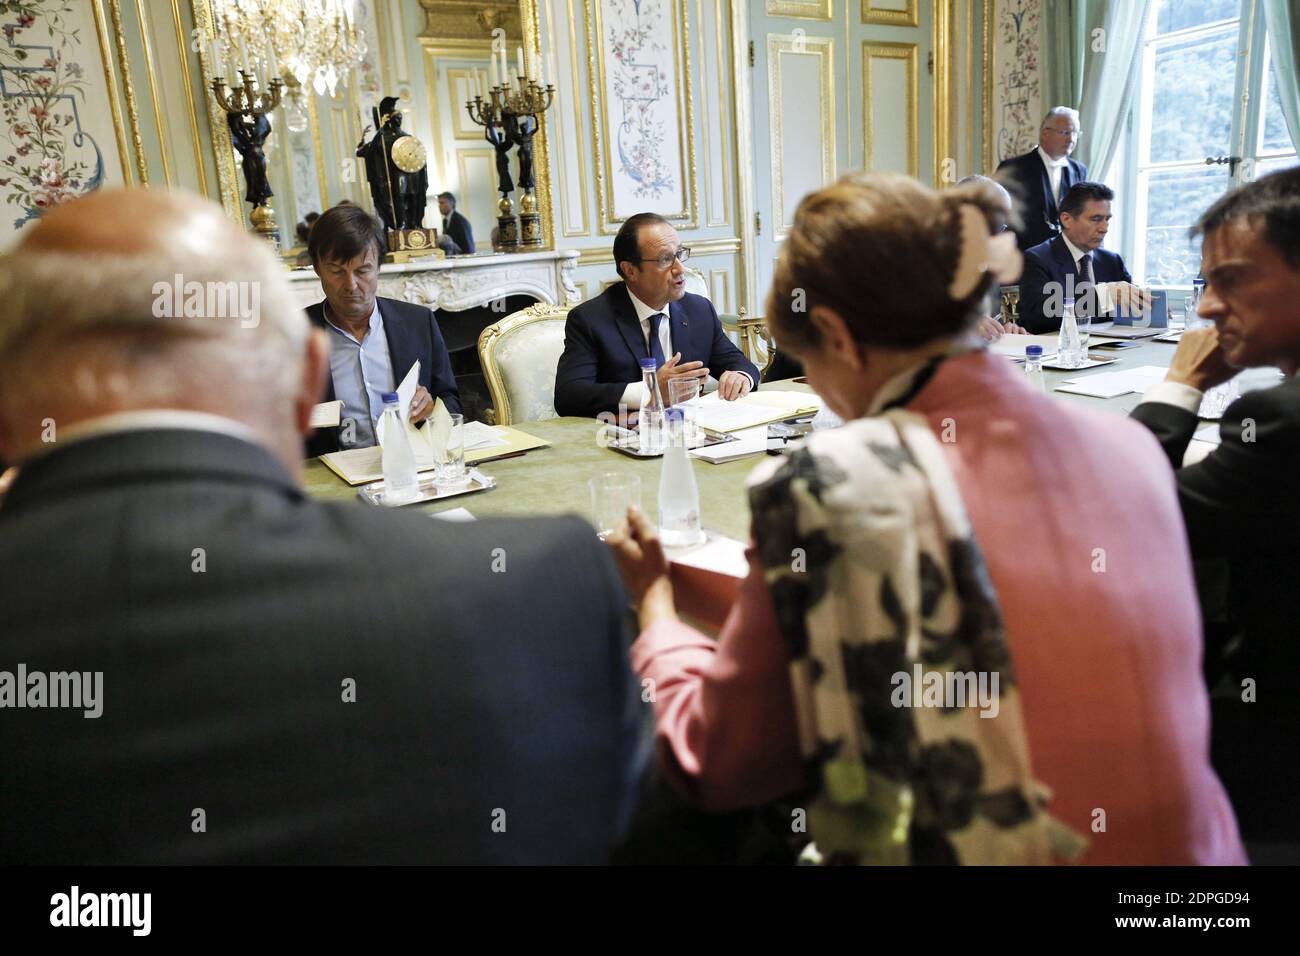 French President Francois Hollande (C) presides over a ministerial meeting including Prime Minister Manuel Valls (foreground, R), Minister of Ecology, Sustainable Development and Energy Segolene Royal (foreground, C), Minister of Foreign Affairs and International Development Laurent Fabius (unpictured), Minister of Finance and Public Accounts Michel Sapin (foreground, L), environmental activist and President Hollande's special envoy for the protection of the planet Nicolas Hulot (background, L) and COP21 special representative Laurence Tubiana (unpictured), in preparation for the COP21 Climate Stock Photo